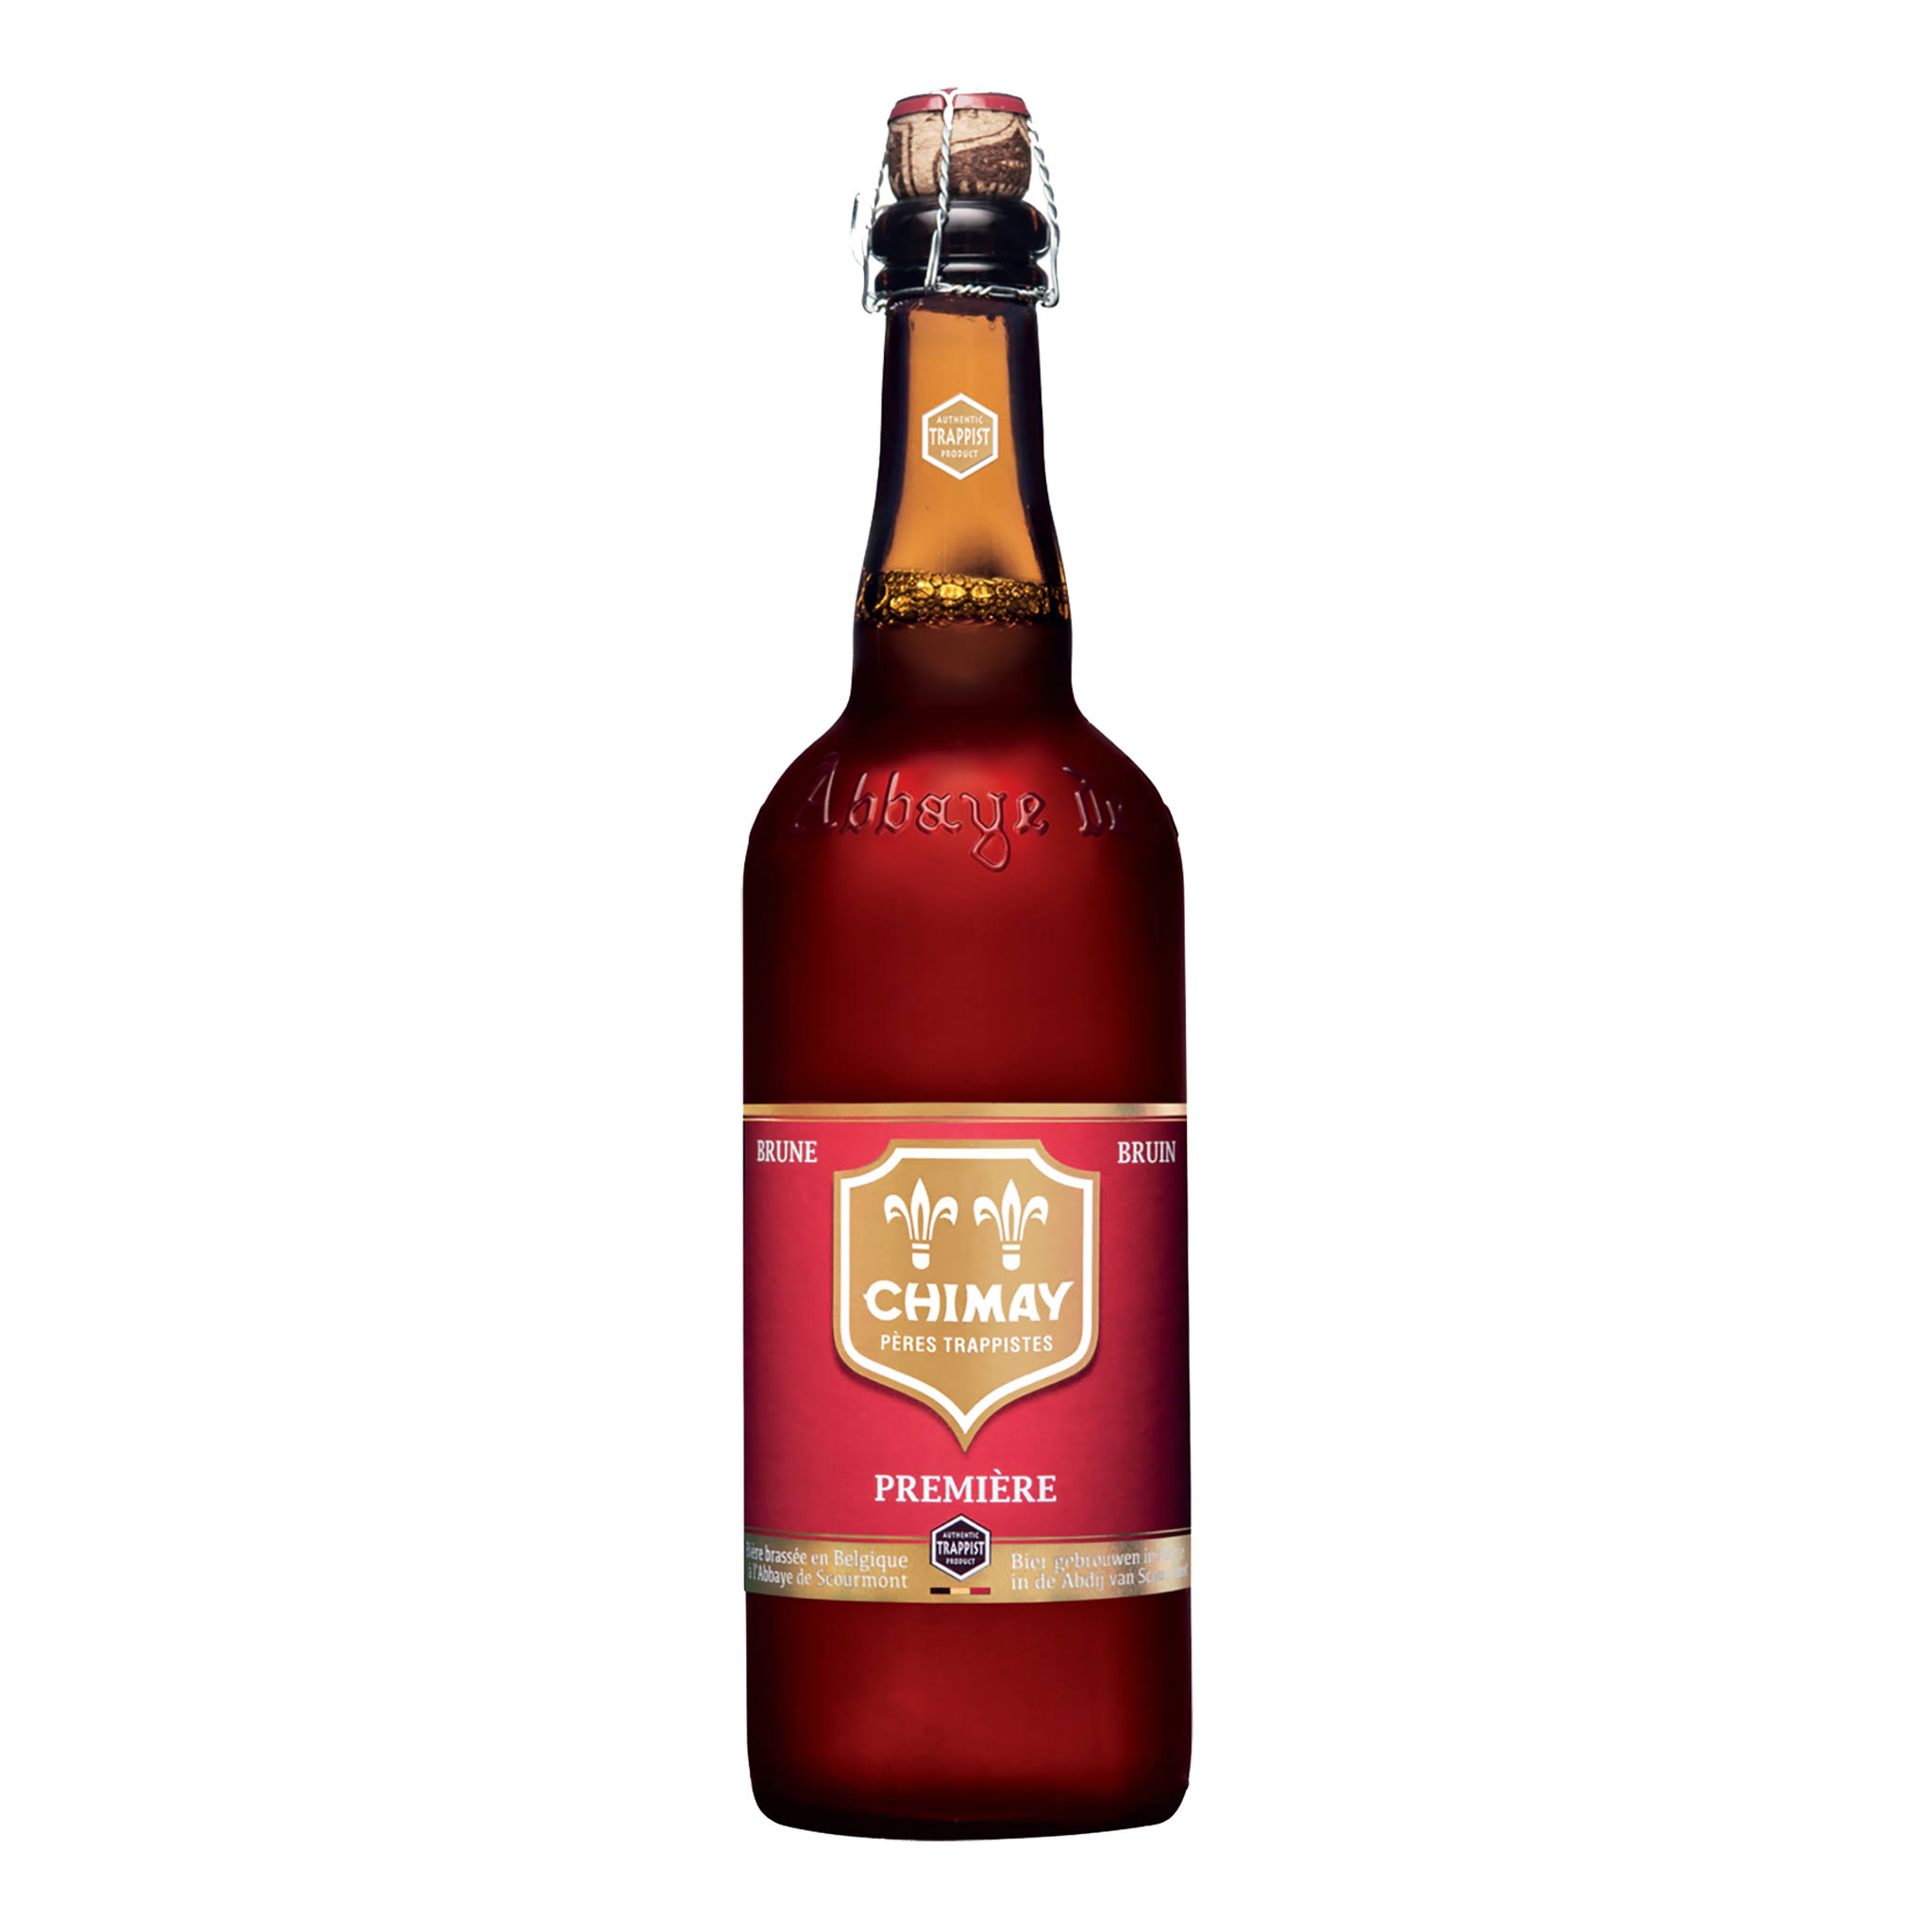 Chimay Premiere Trappistes Beer